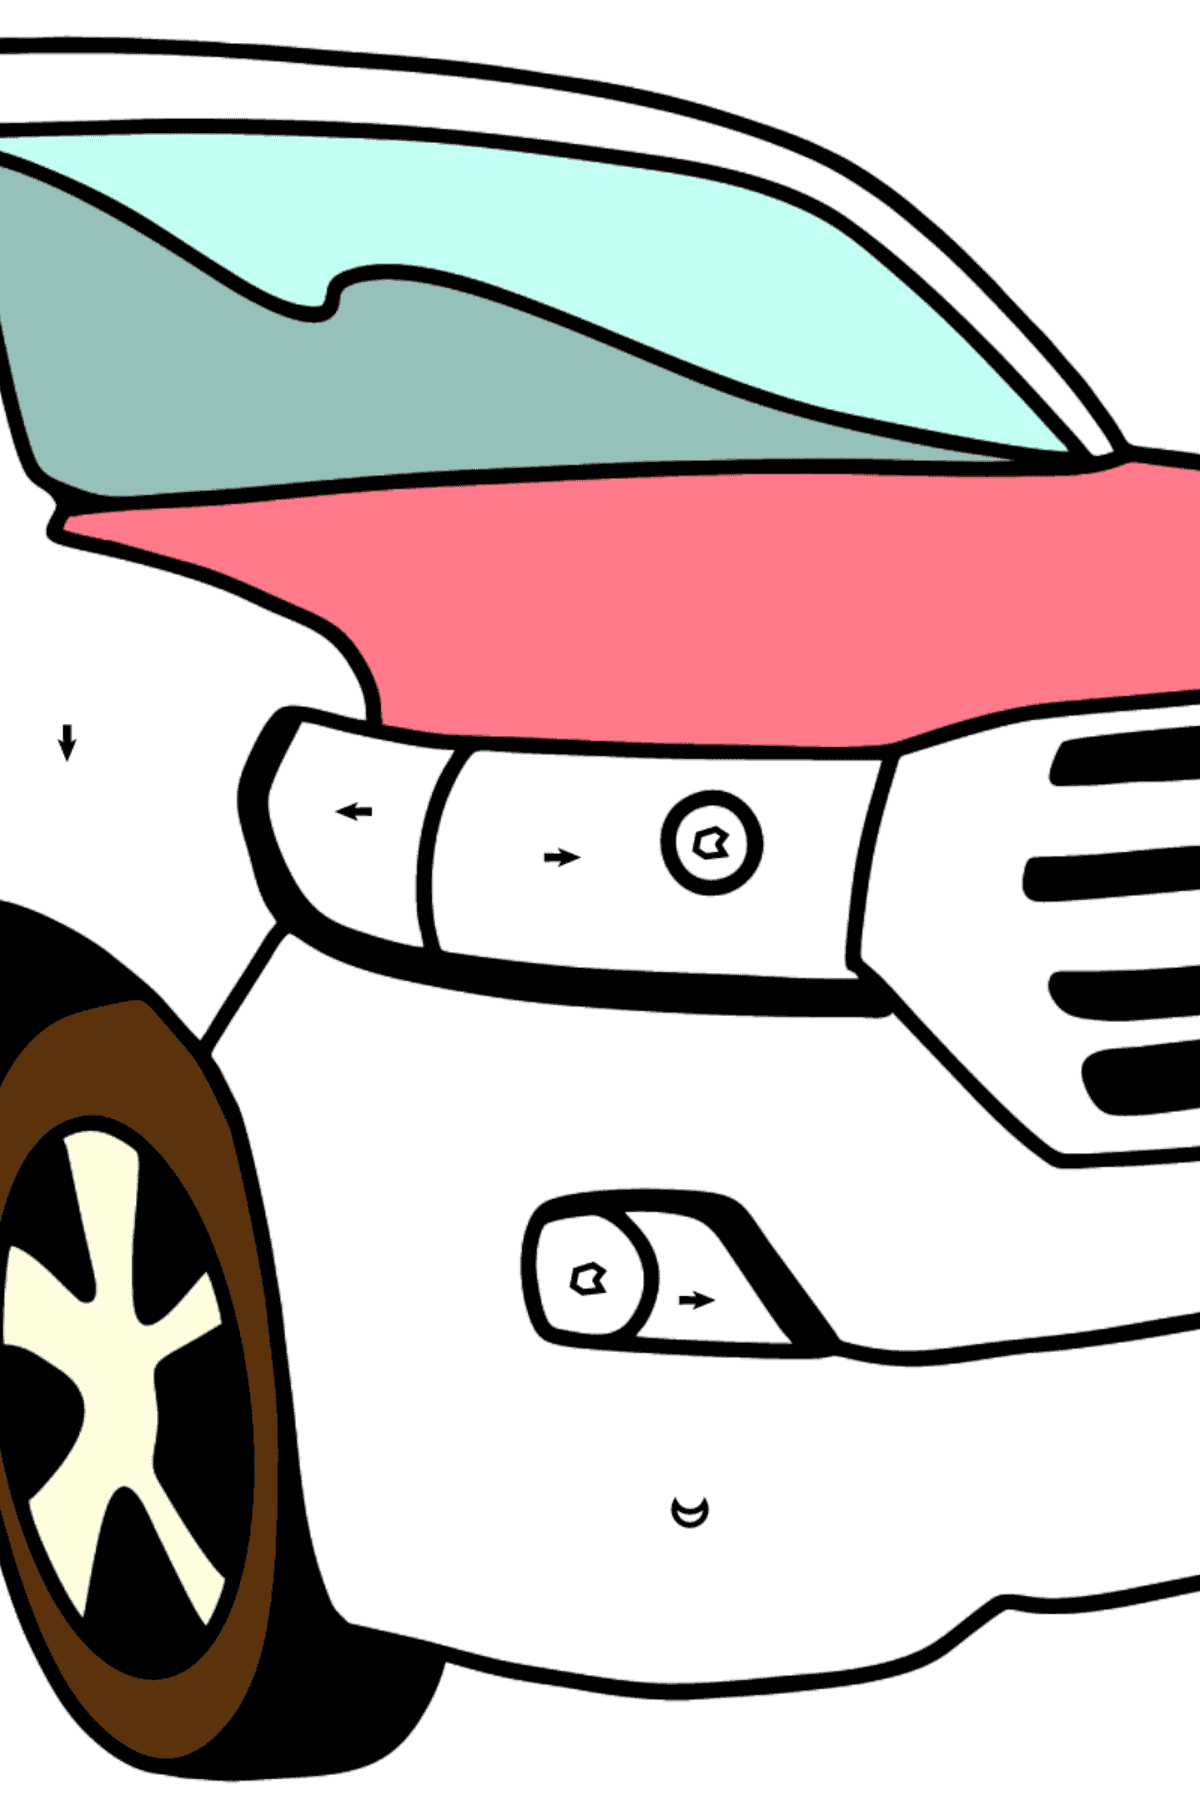 Toyota Land Cruiser Car coloring page - Coloring by Symbols and Geometric Shapes for Kids